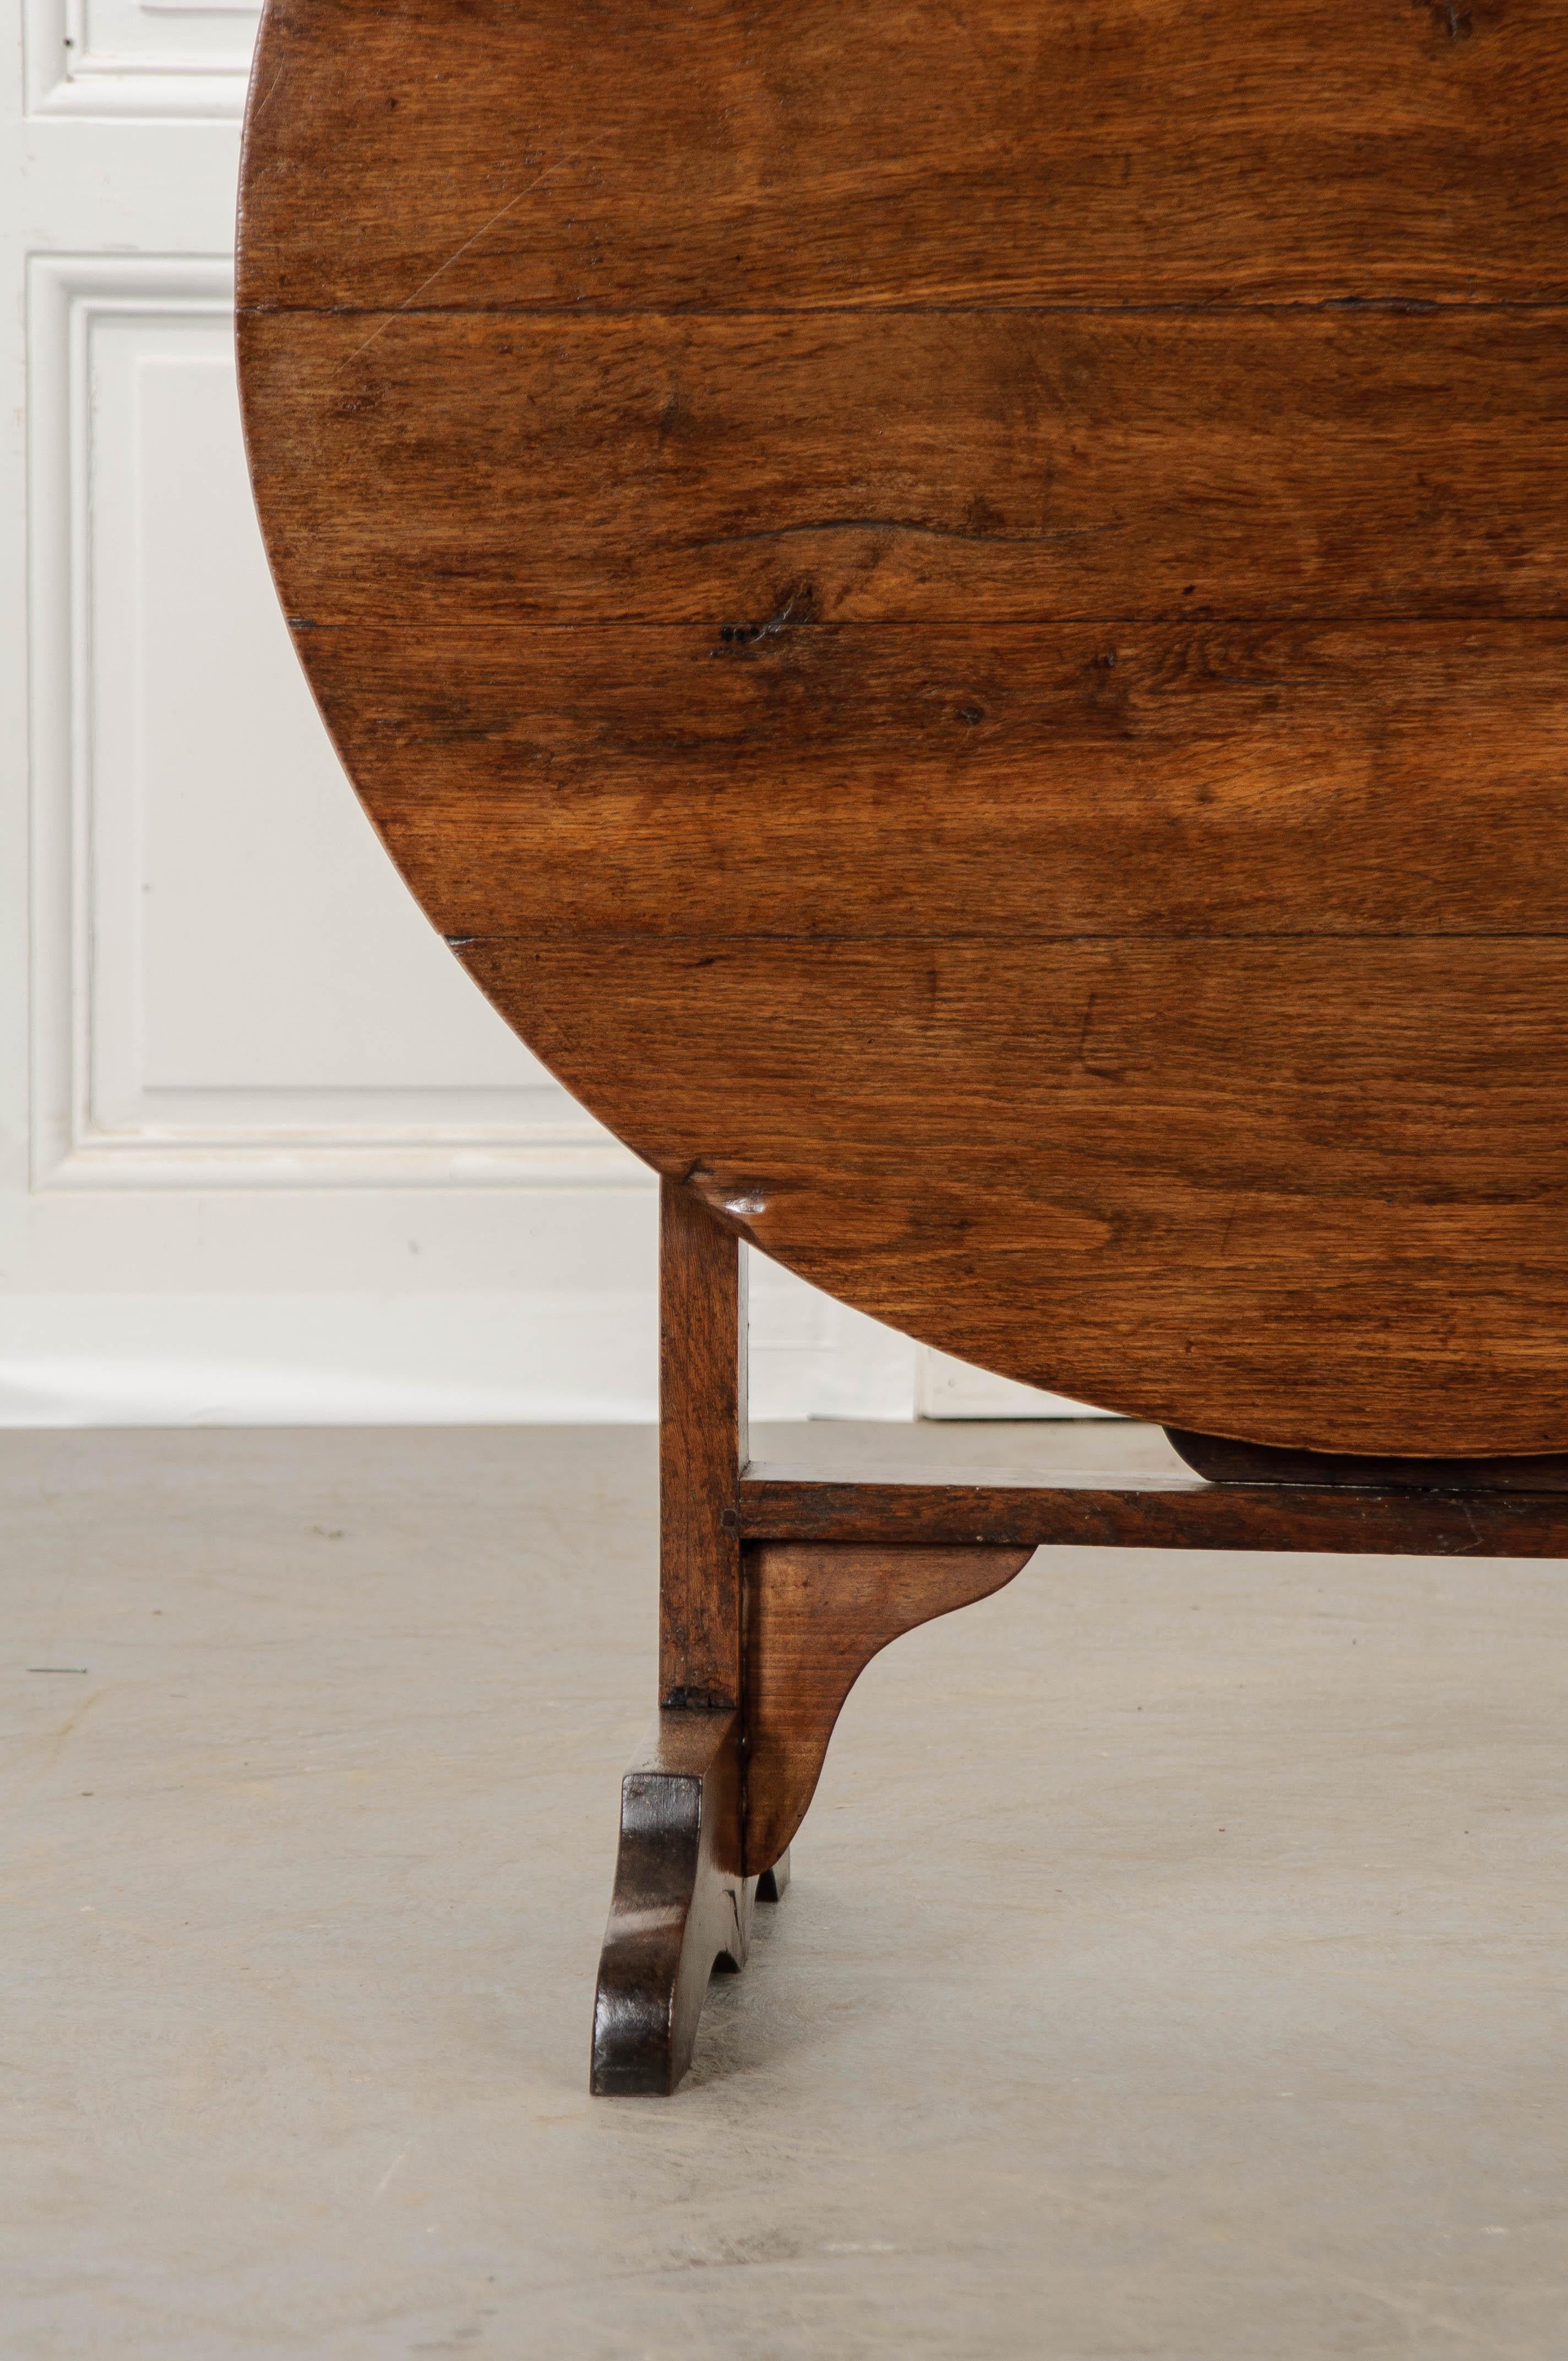 A very special oak vendange table, also known as a wine taster’s table, made in France, circa 1840. The table has a round top, made of oak with a styled base that is also made of oak. This table would have been brought out for tasting wine in the